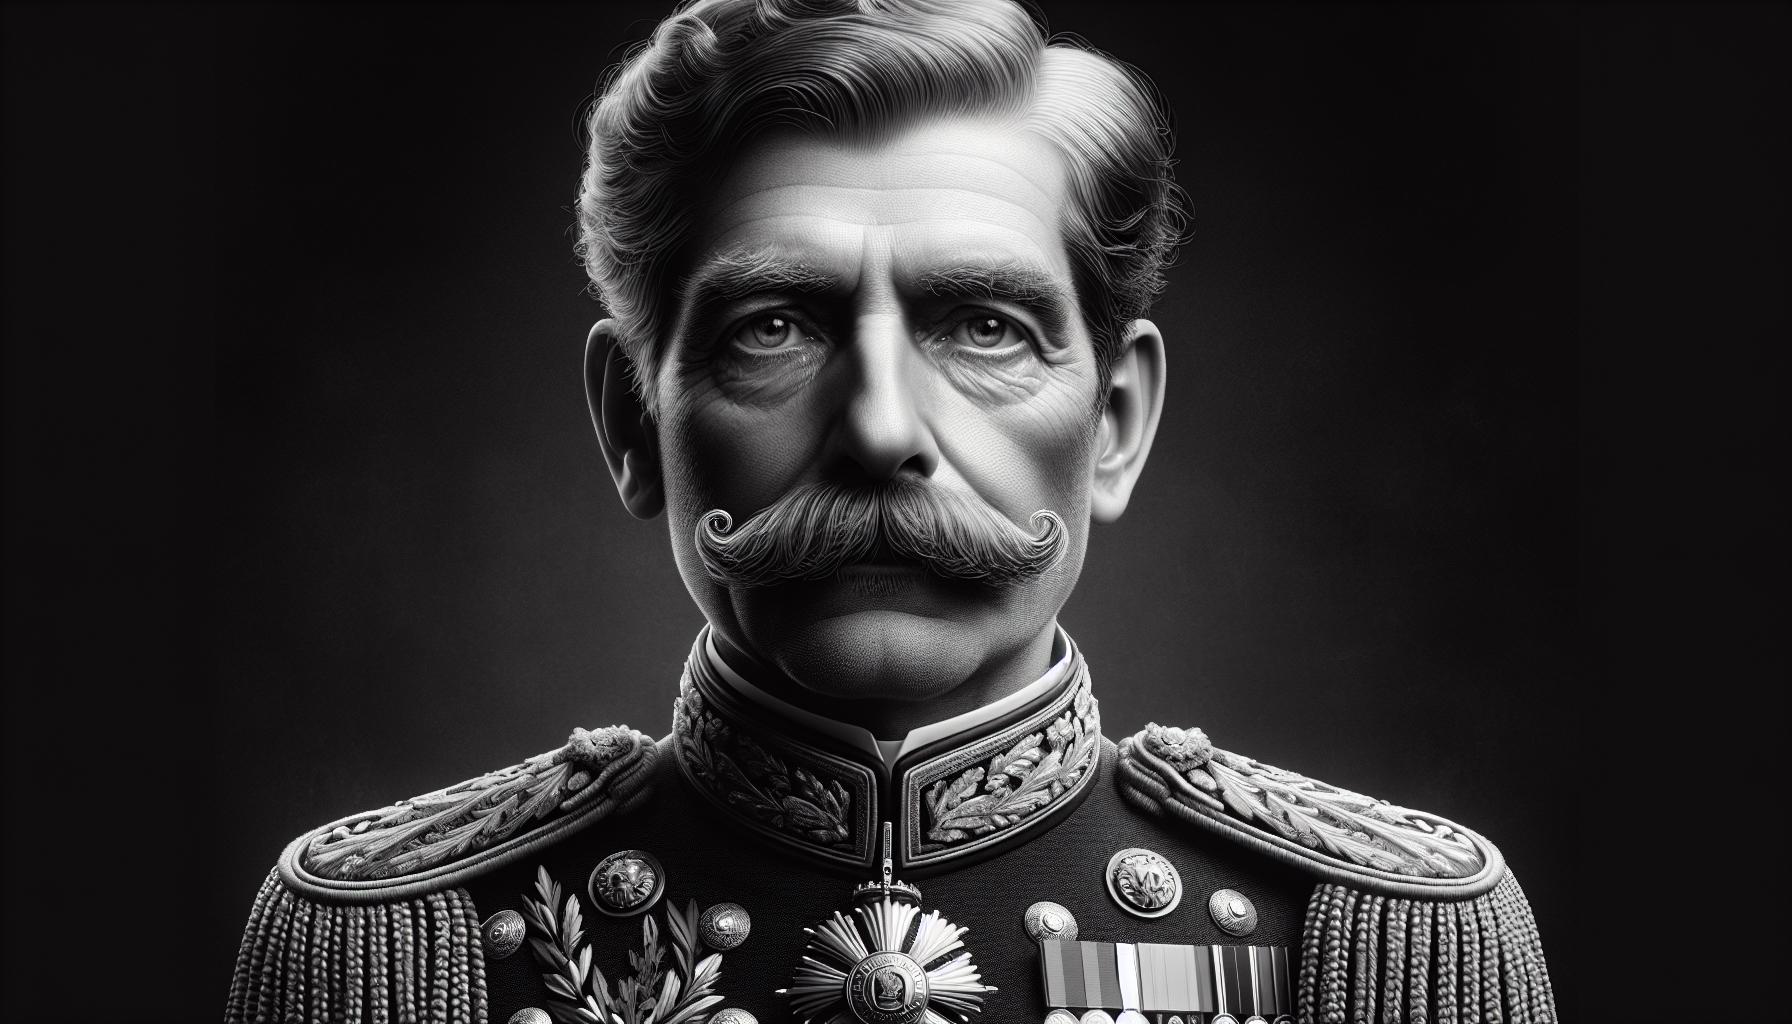 Imperial Mustache Guide: Style Power & Elegance